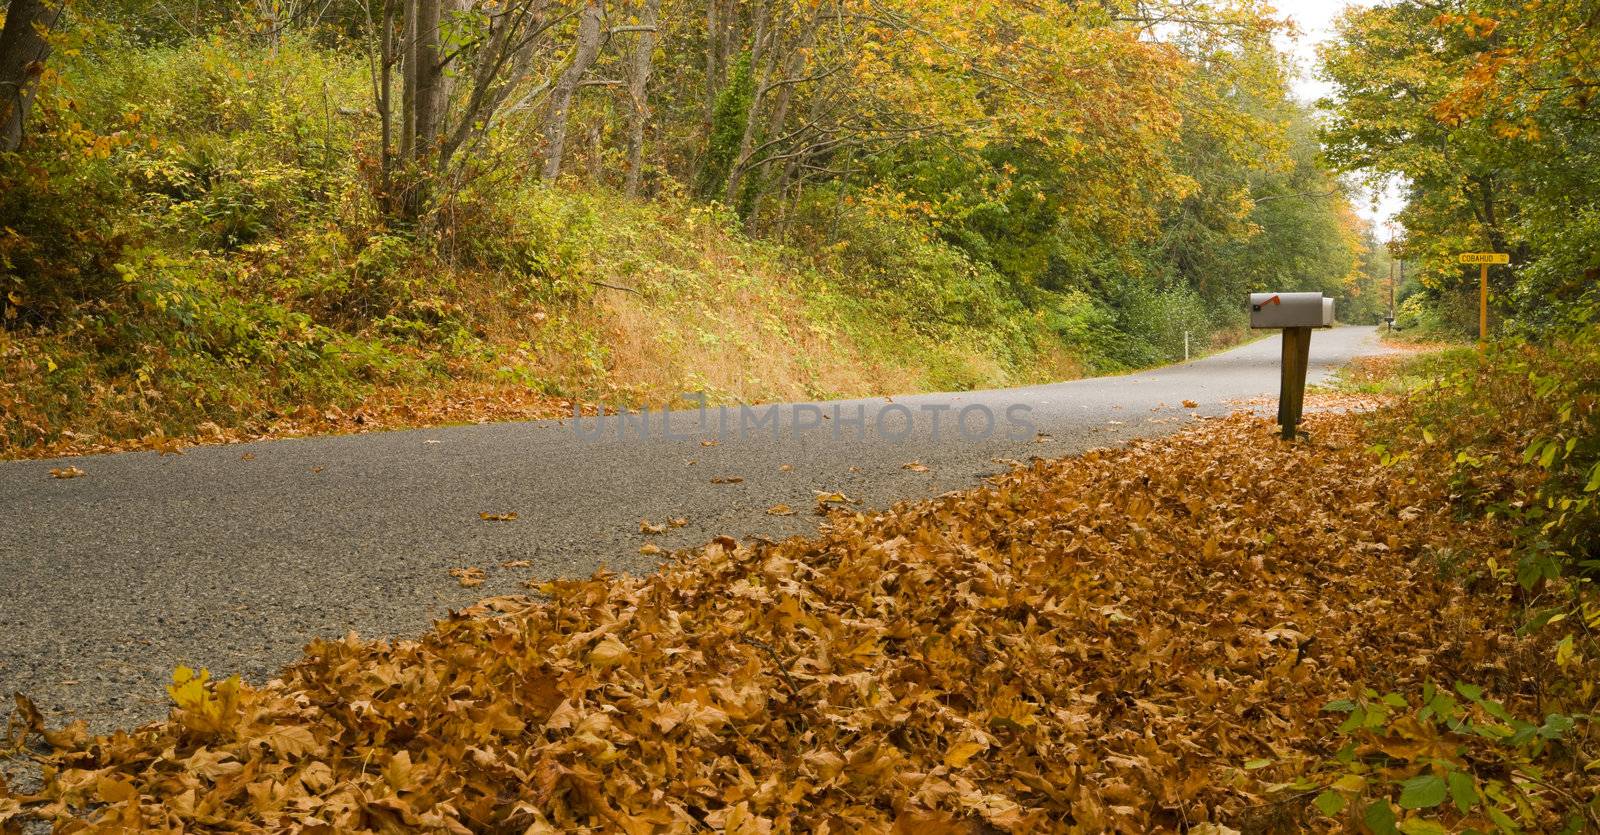 Leaves file to the side of the road as Autumn comes to the countryside